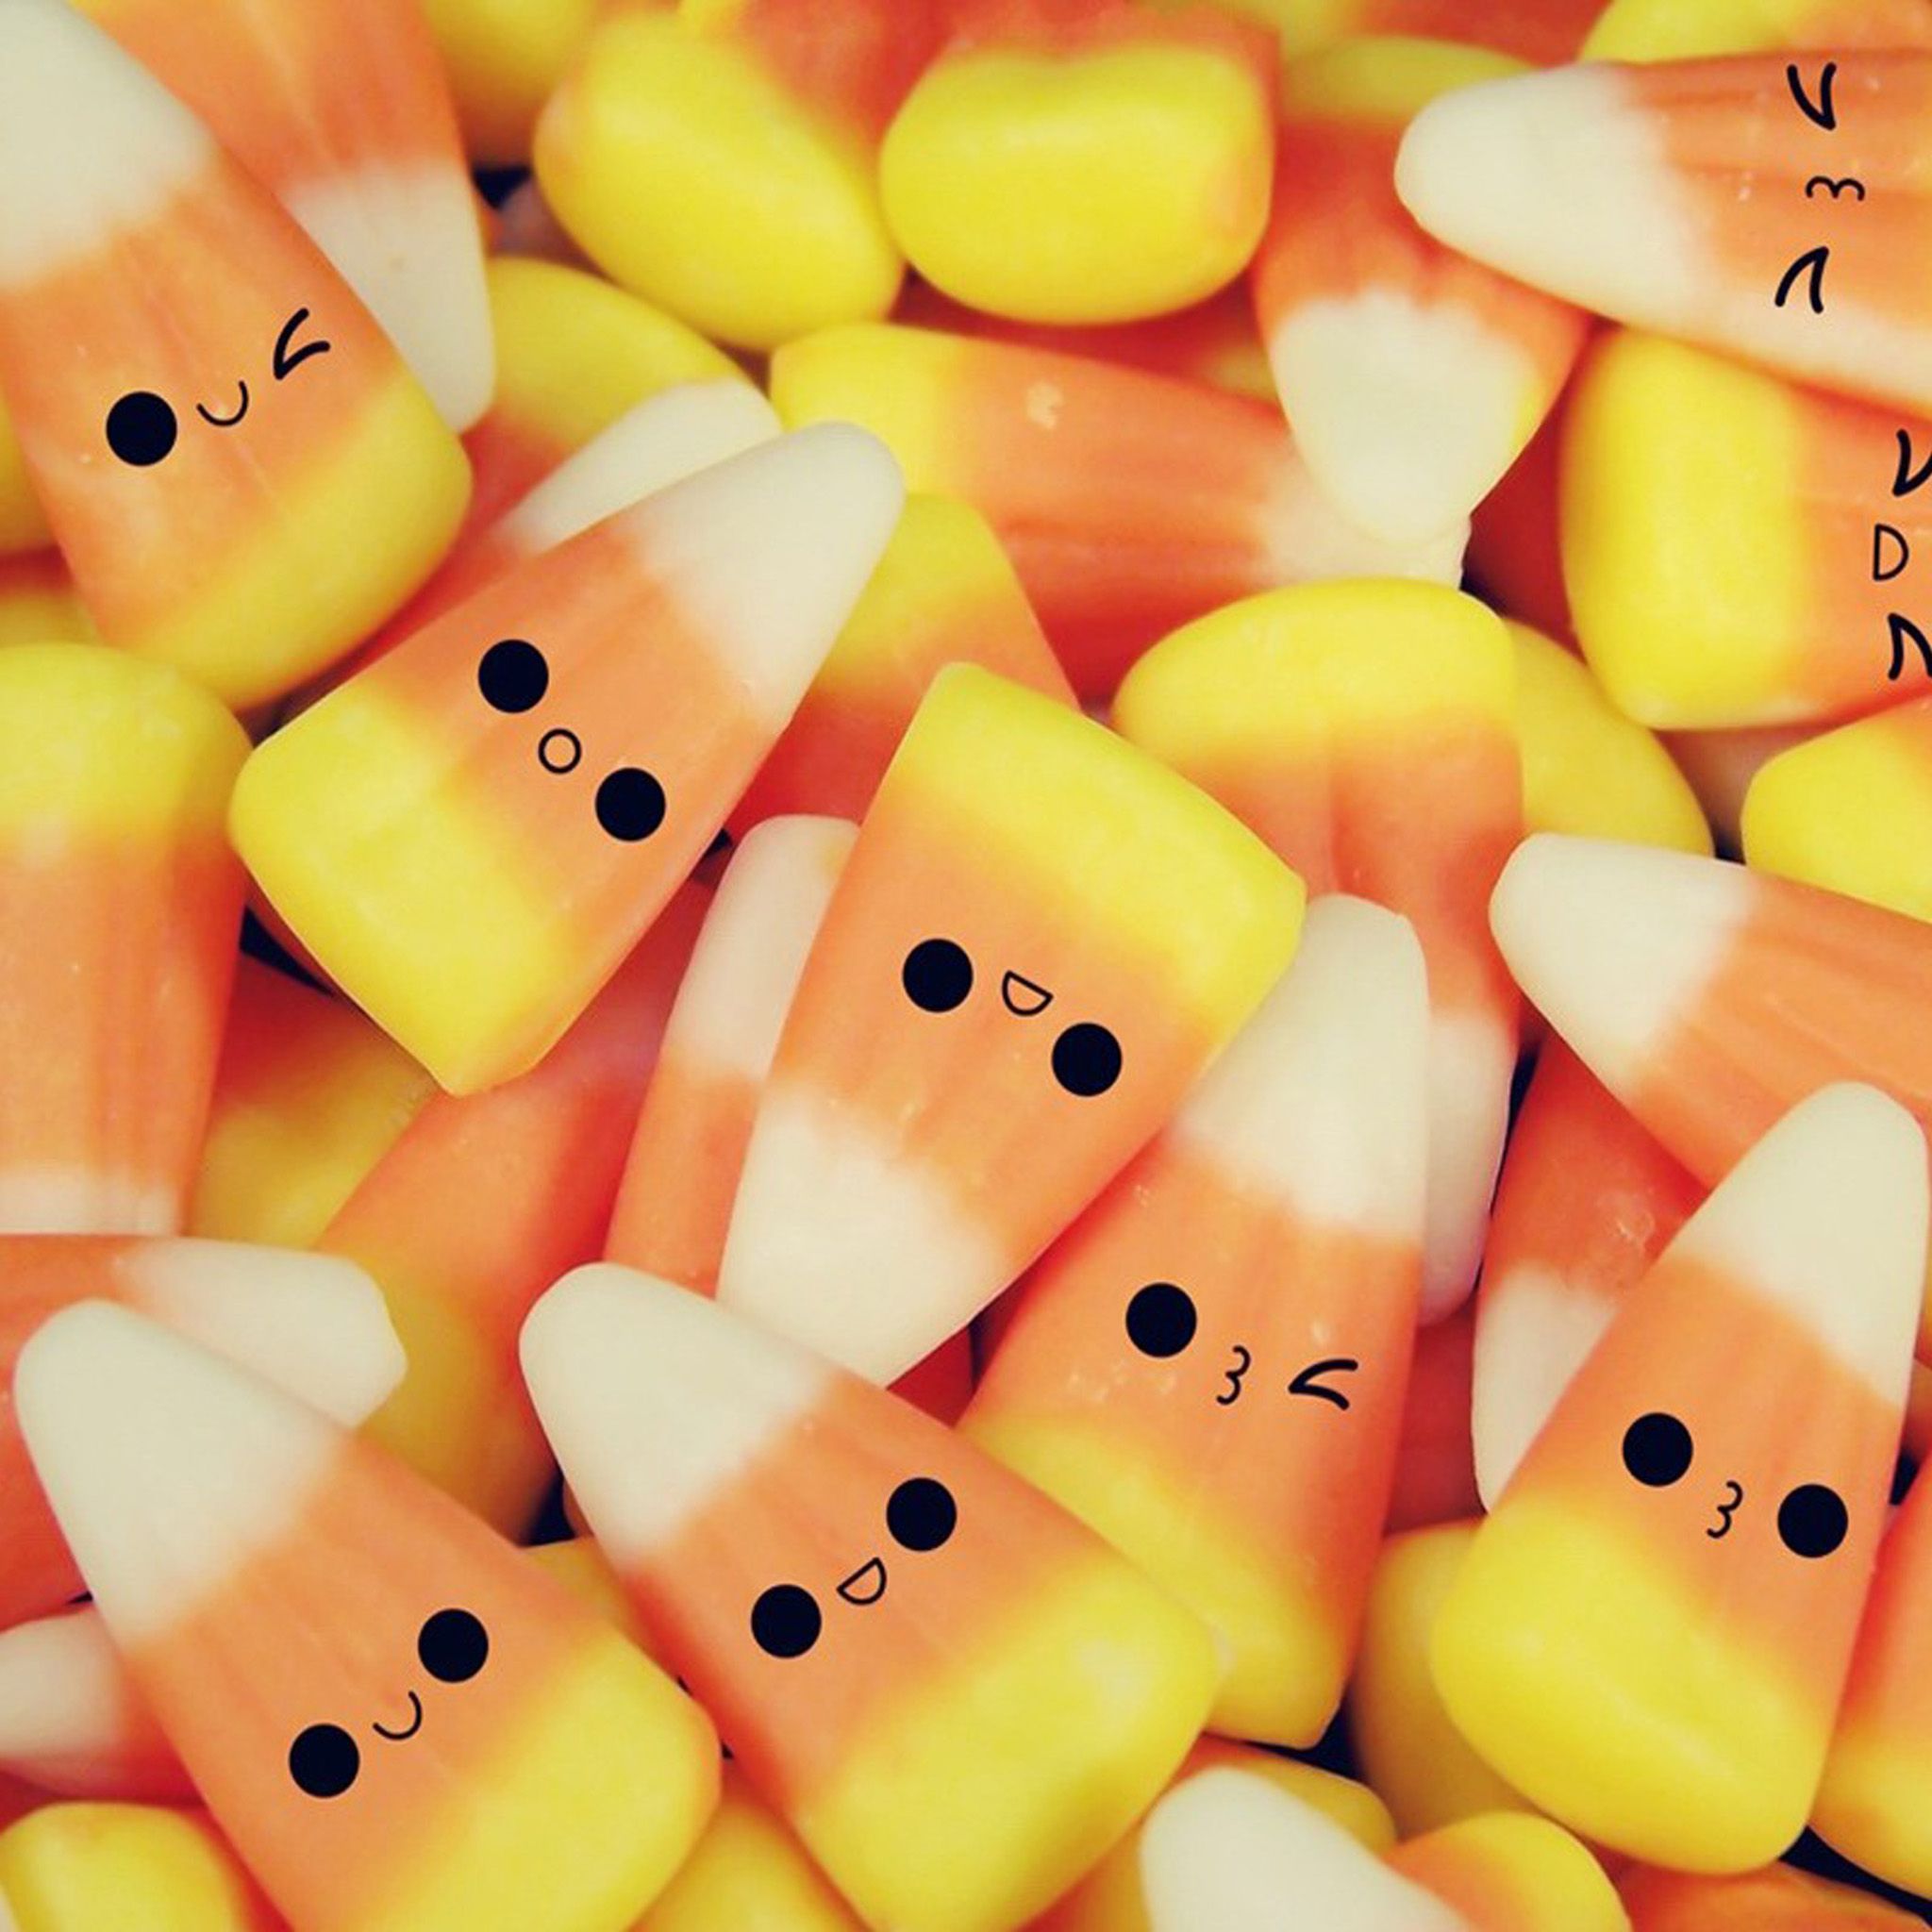 A pile of candy corn with faces drawn on them. - Candy